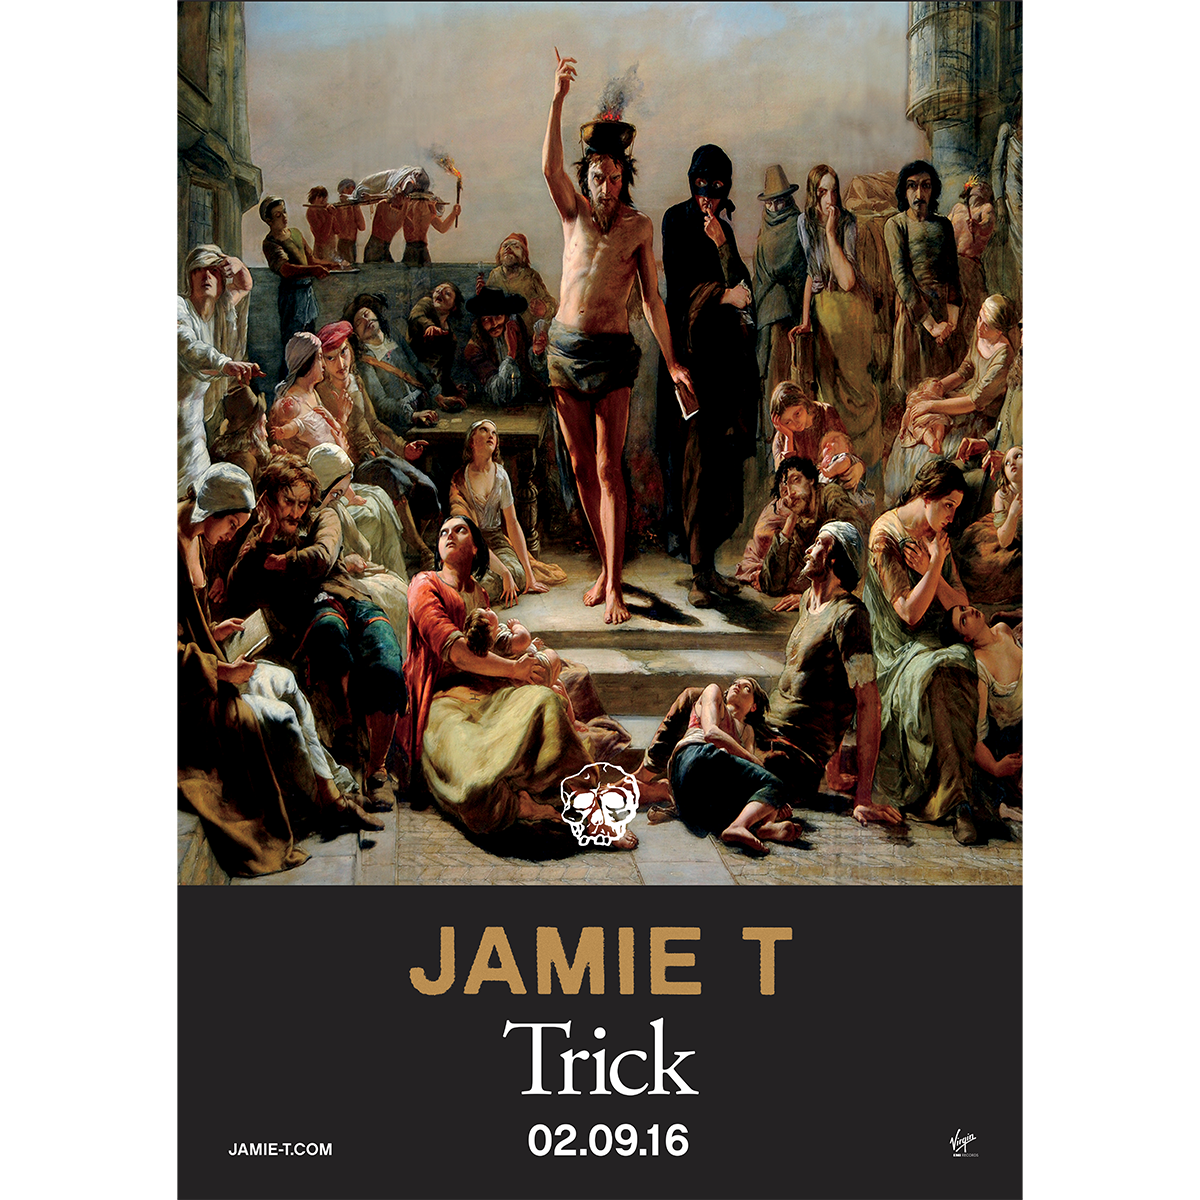 Jamie T - Trick Poster (Signed)